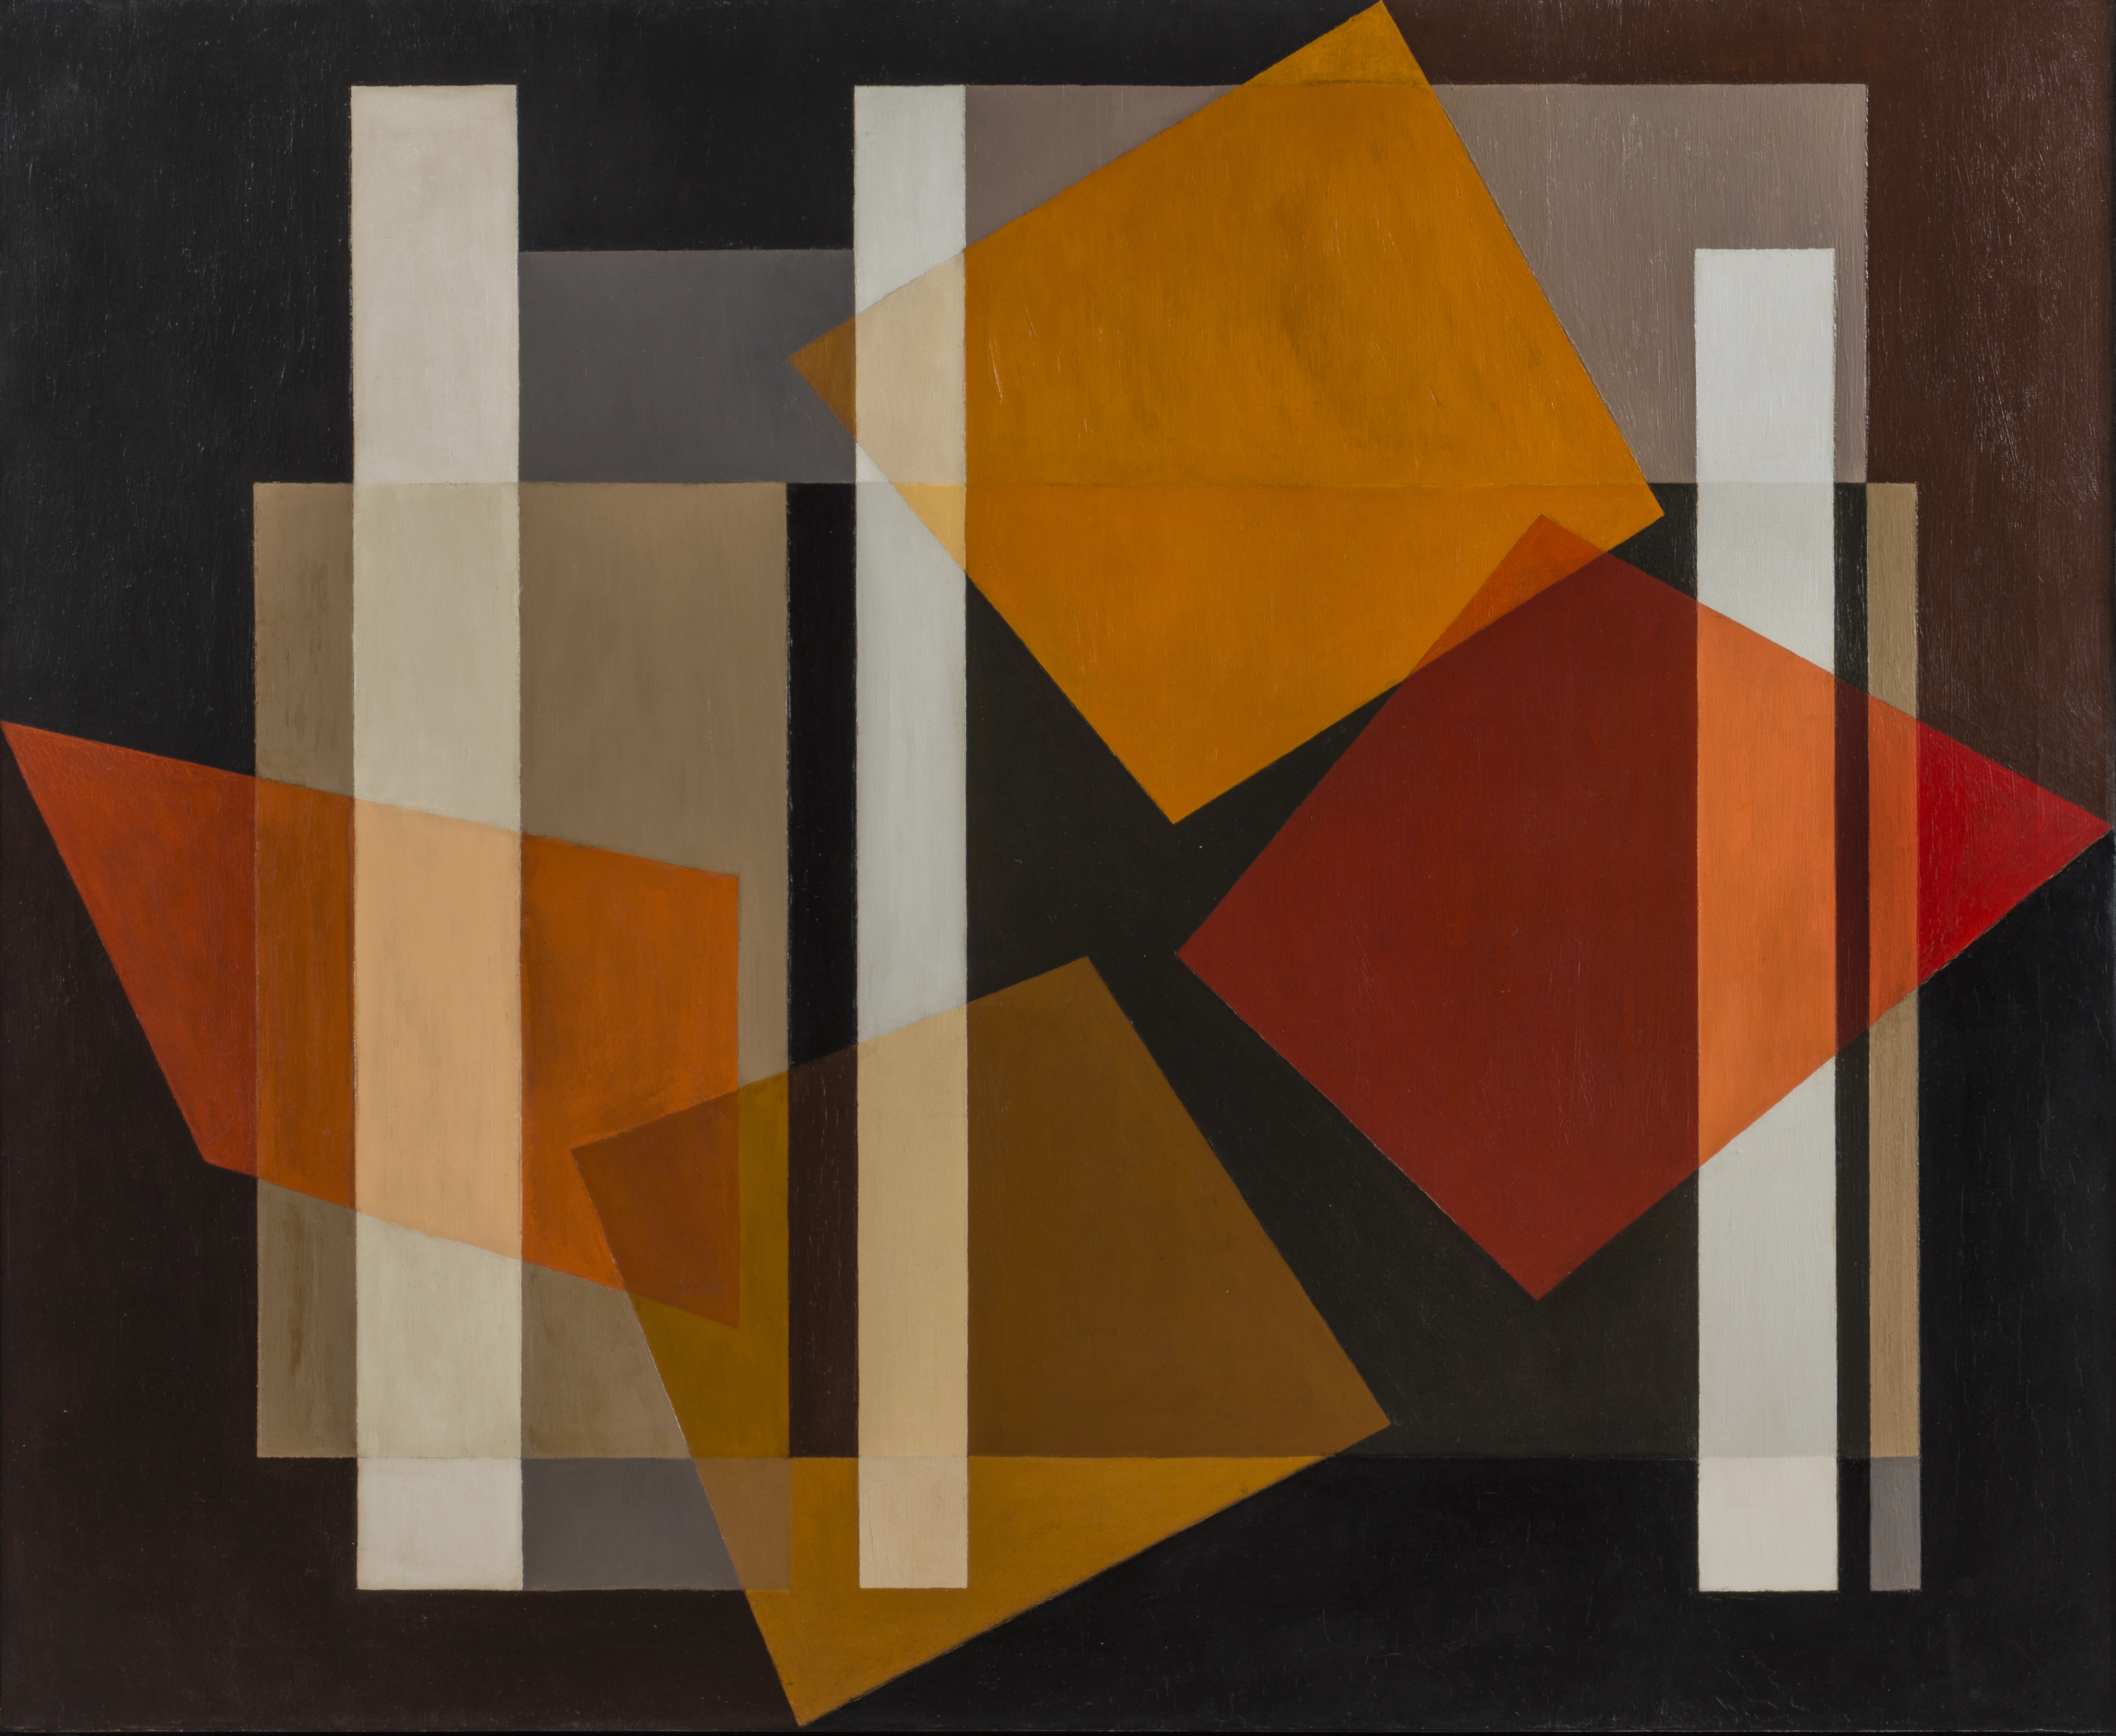 Oil on canvas painting of geometric forms layered over a black background; four parallelograms of varying orange shades are in the foreground, with vertical and horizontal brown and beige rectangles of varying thickness behind them.